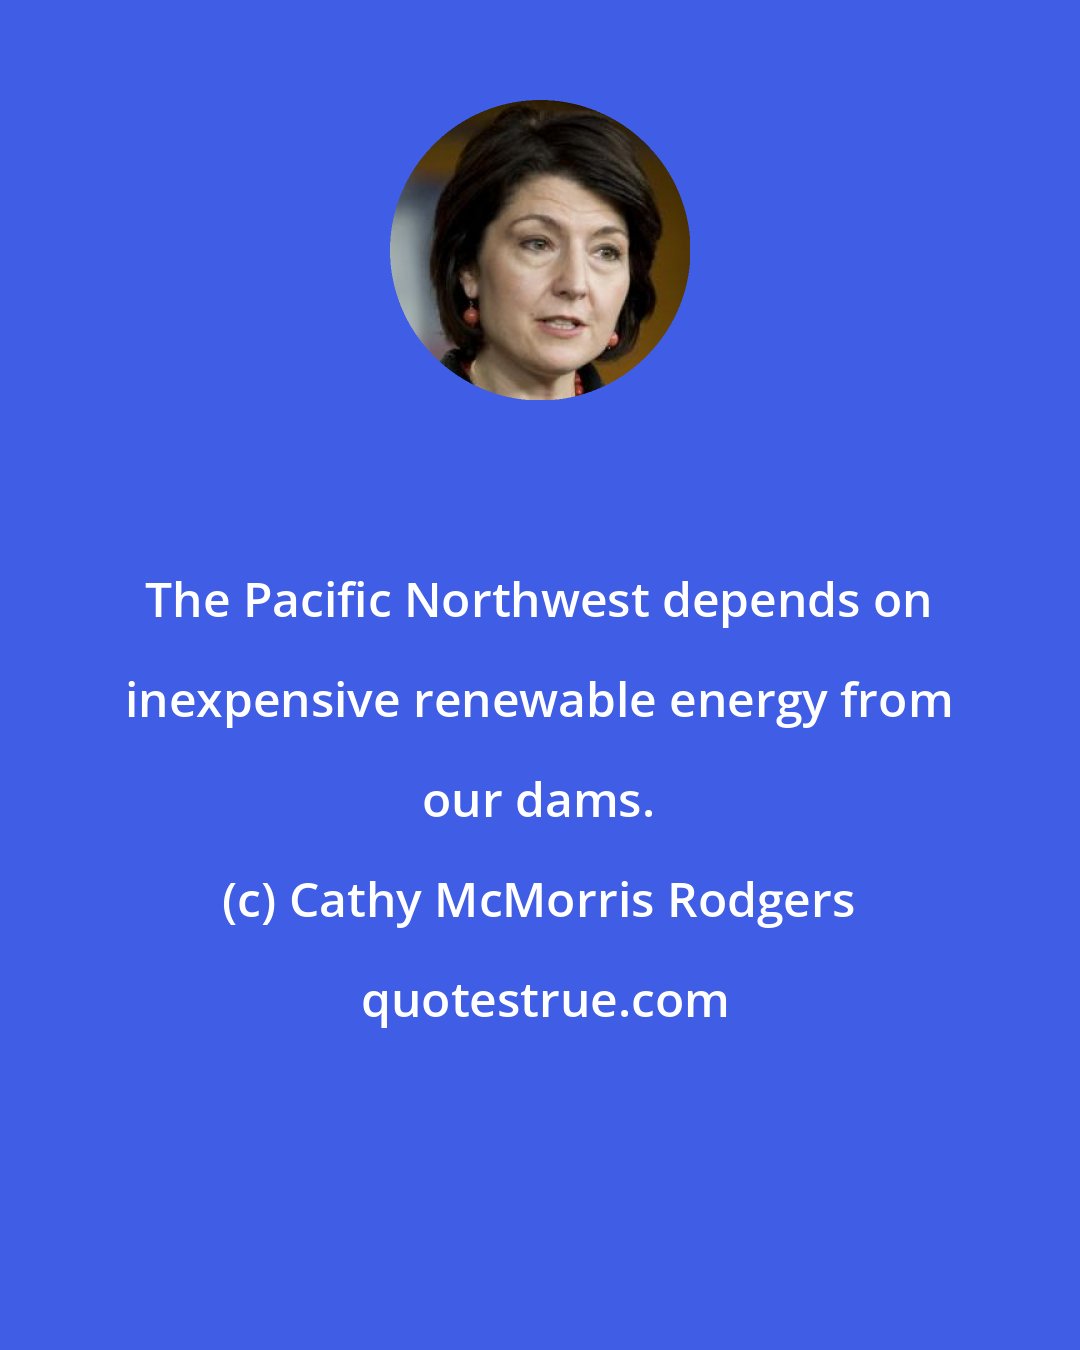 Cathy McMorris Rodgers: The Pacific Northwest depends on inexpensive renewable energy from our dams.